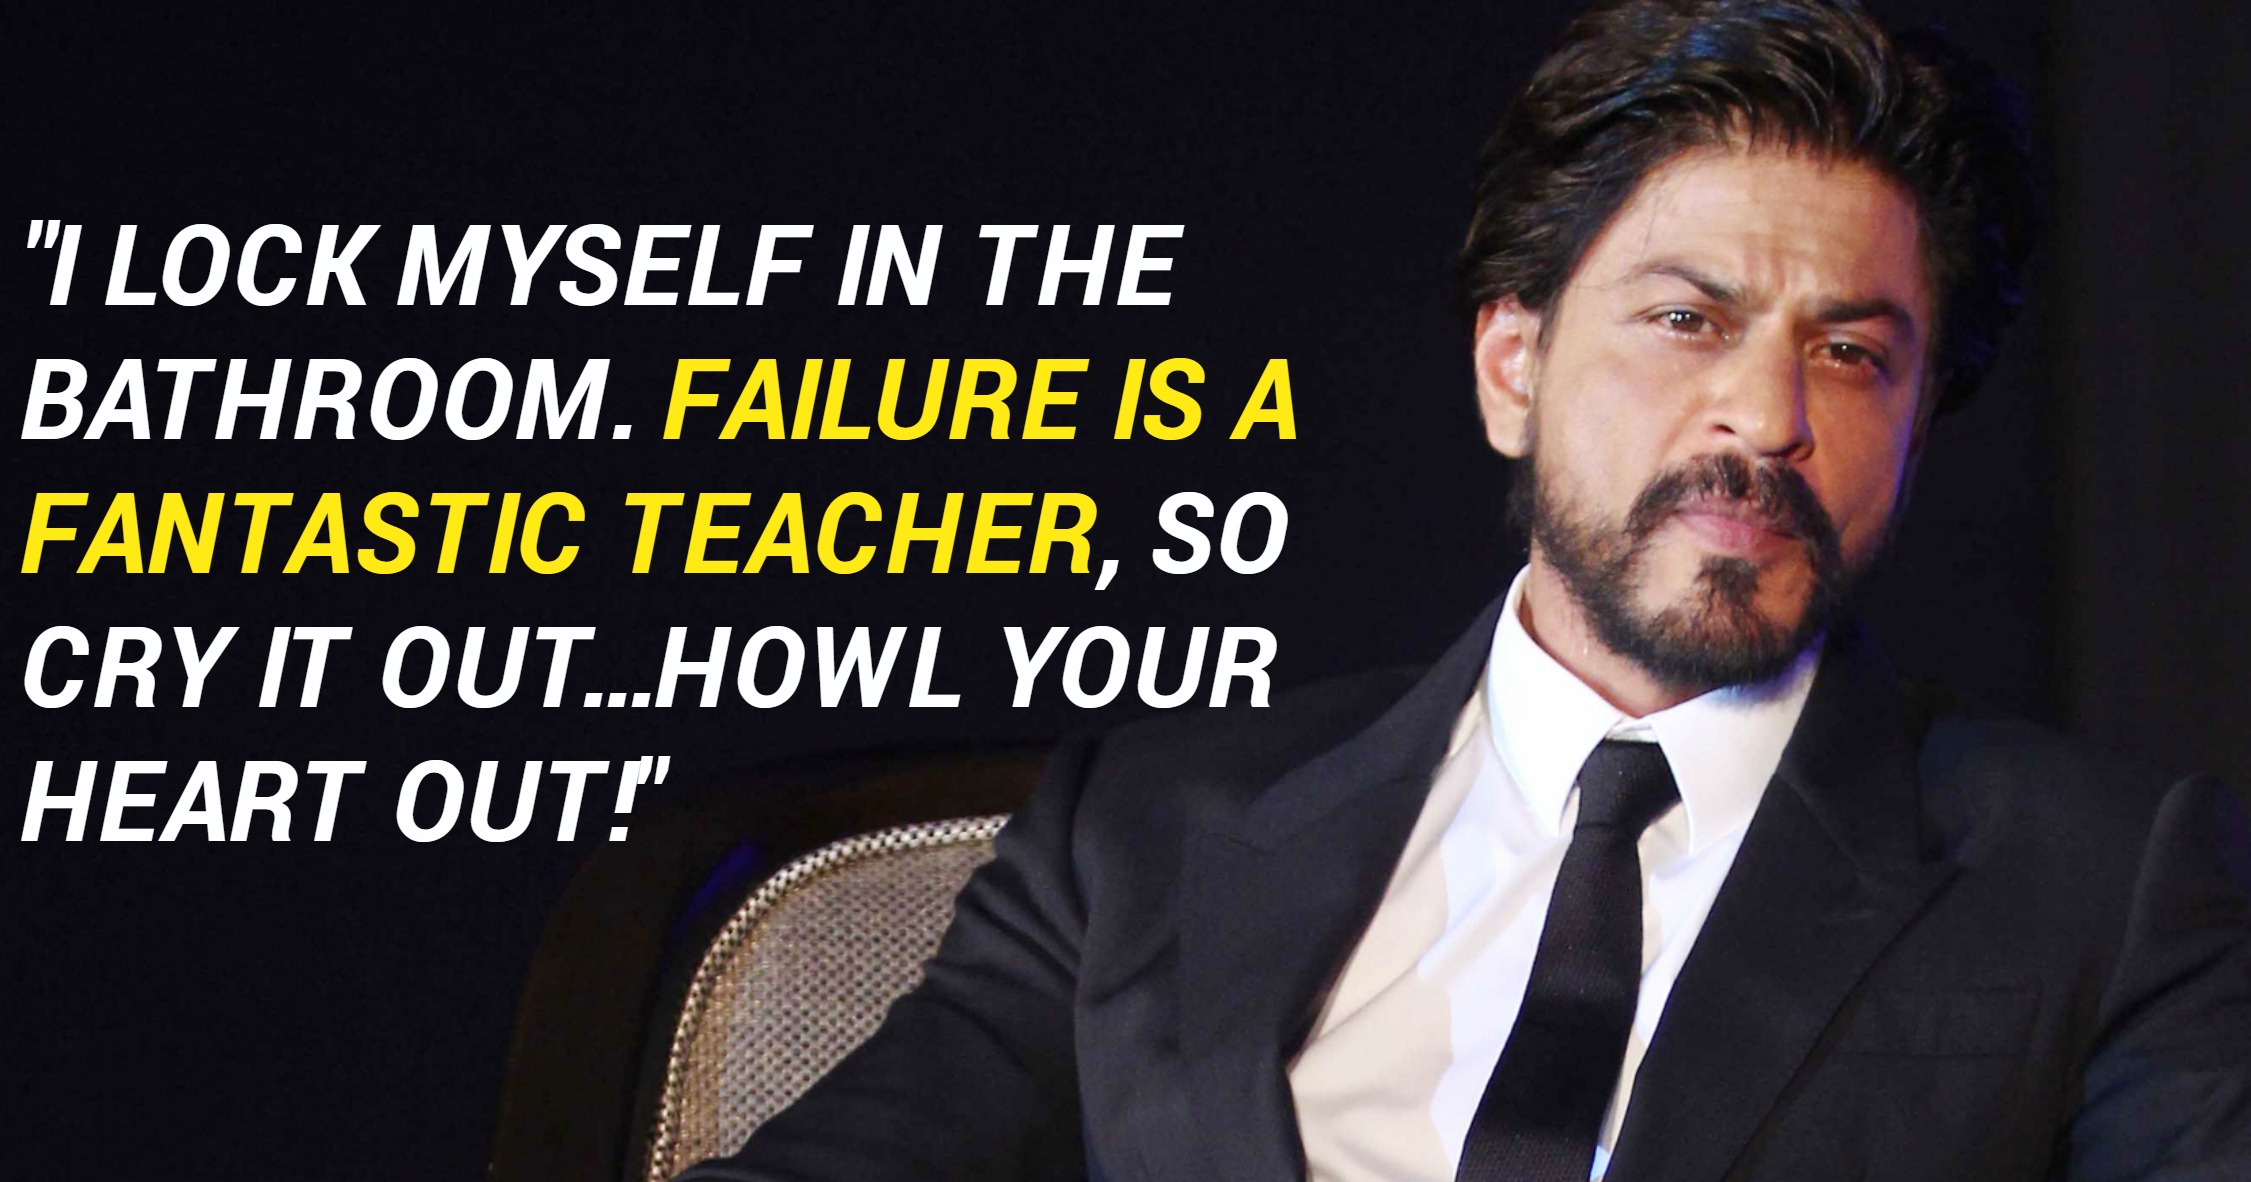 Shah Rukh Khan's Epic Response to Fan Claiming His Team is